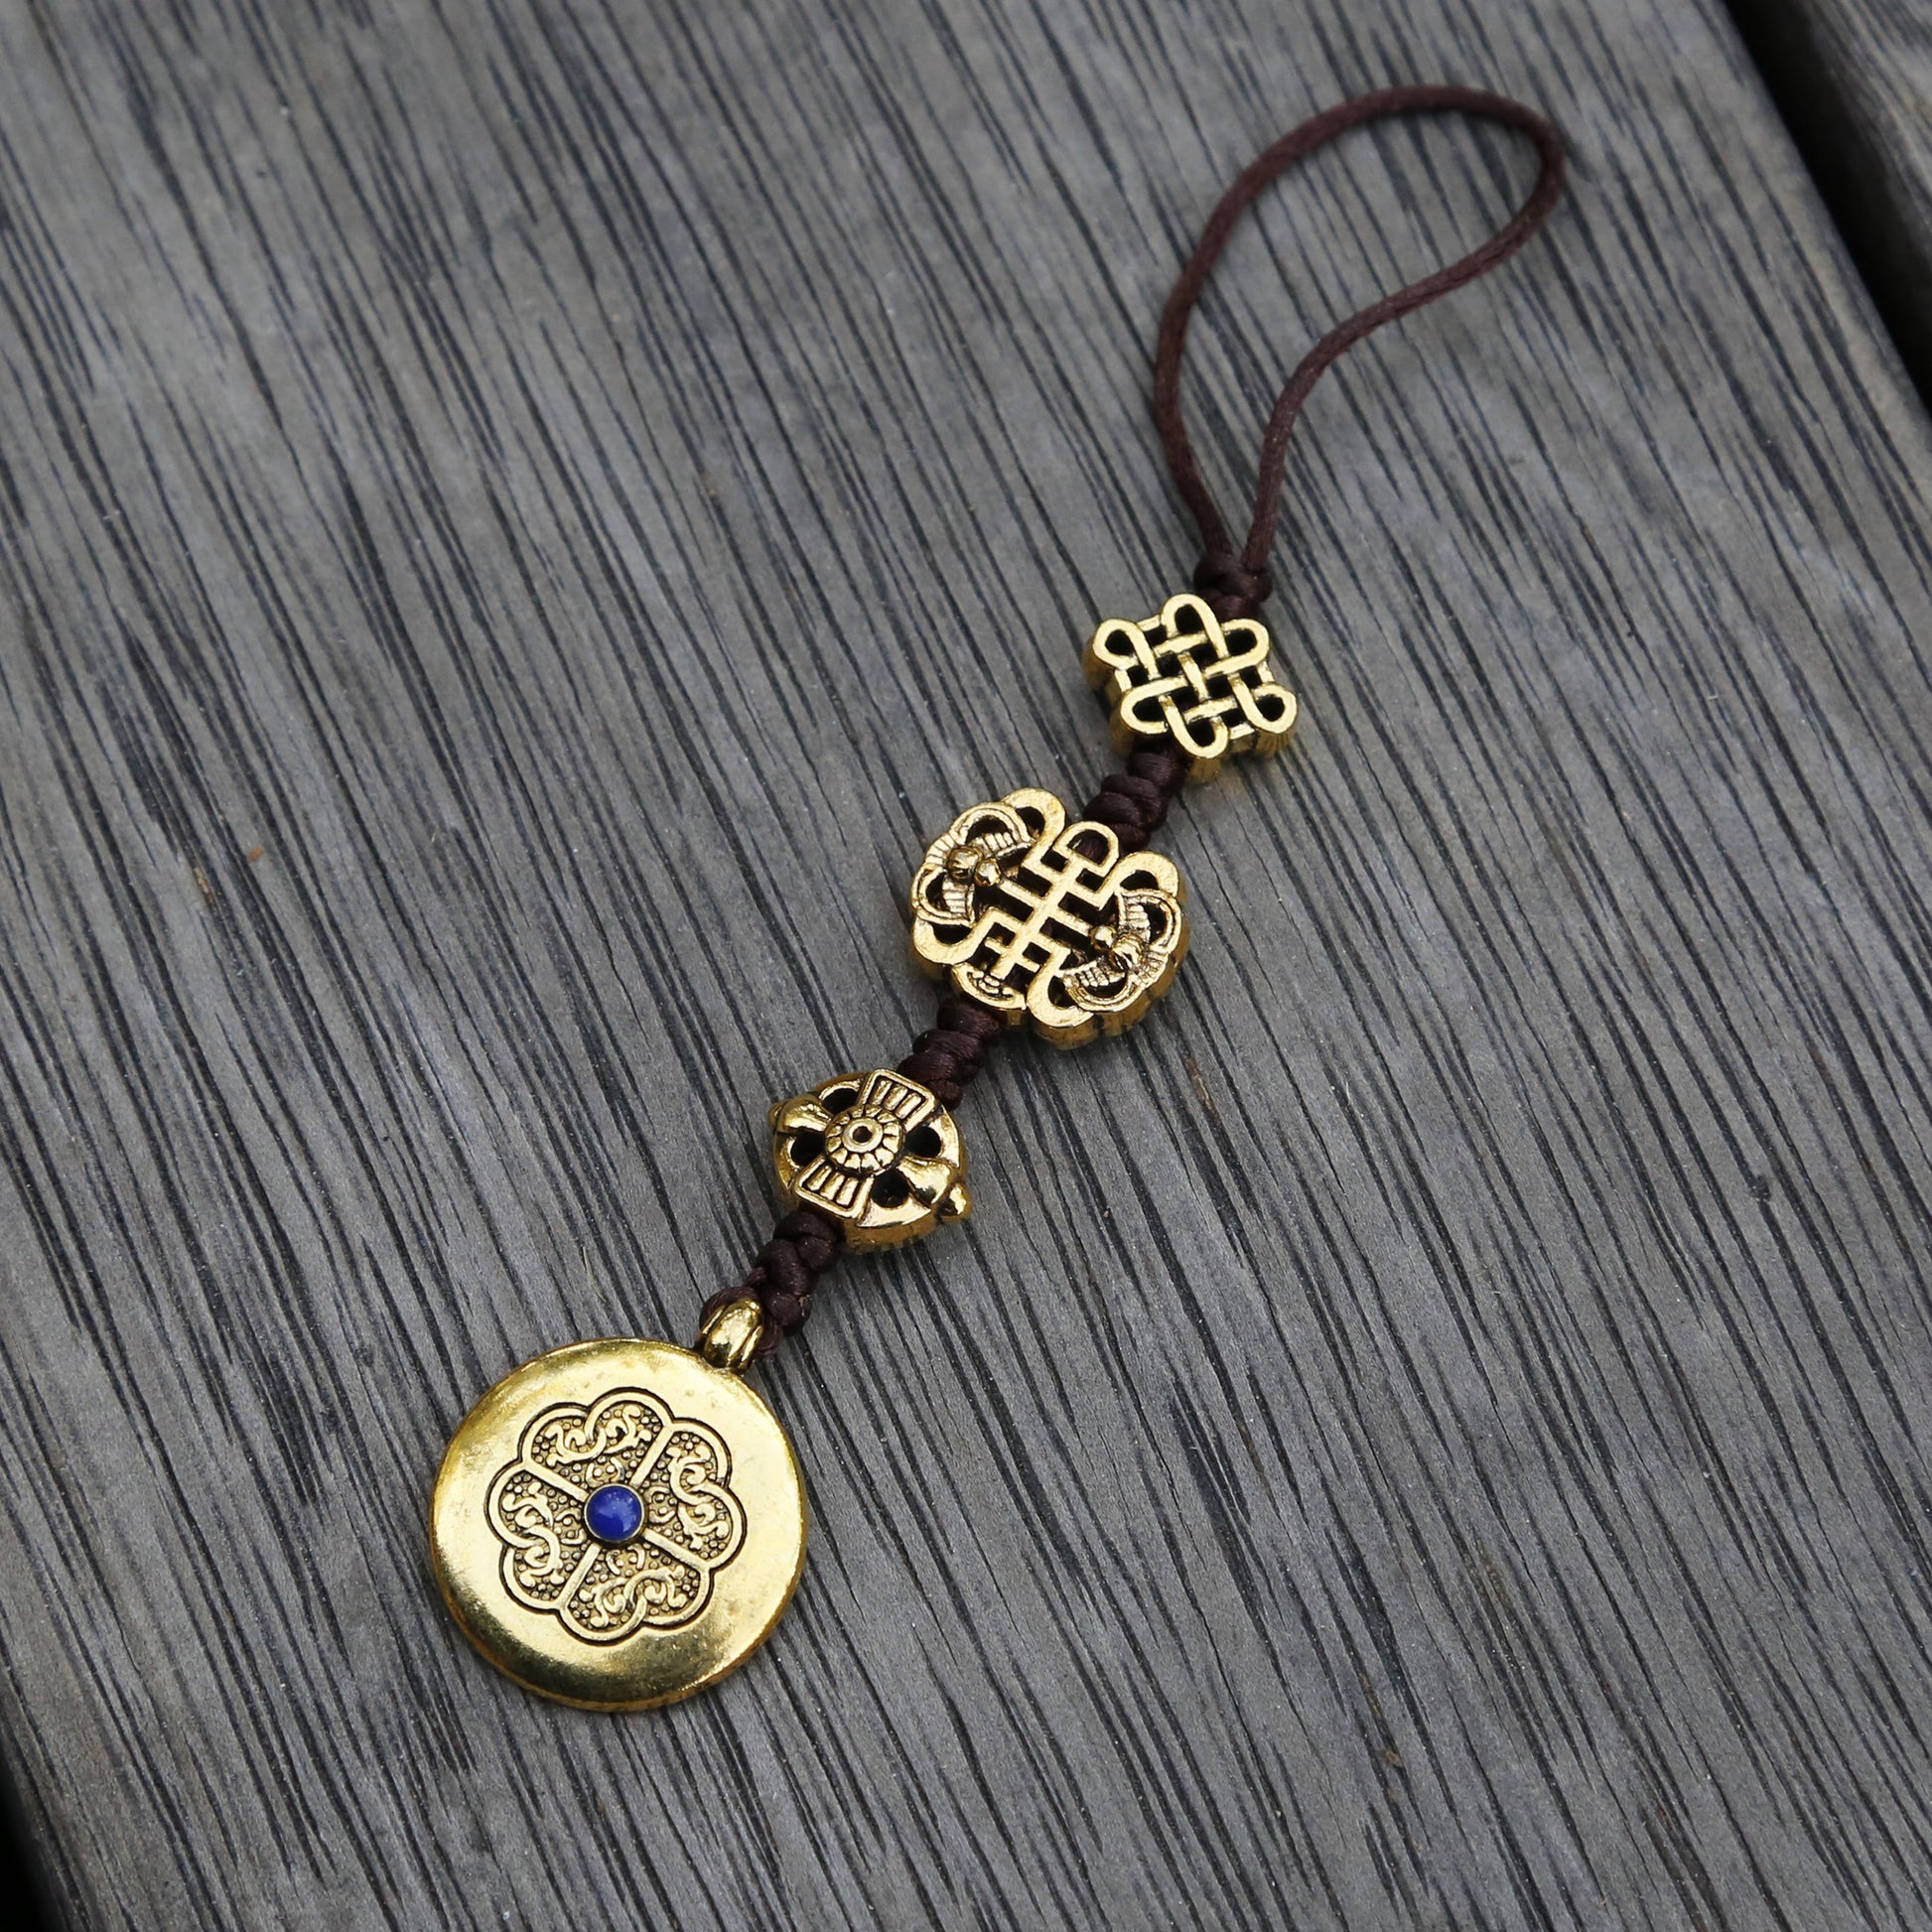 Brass Color Talisman Protection Zipper Charm, Tibetan Style Keychain, Chinese Bagua Car Charm - Small.